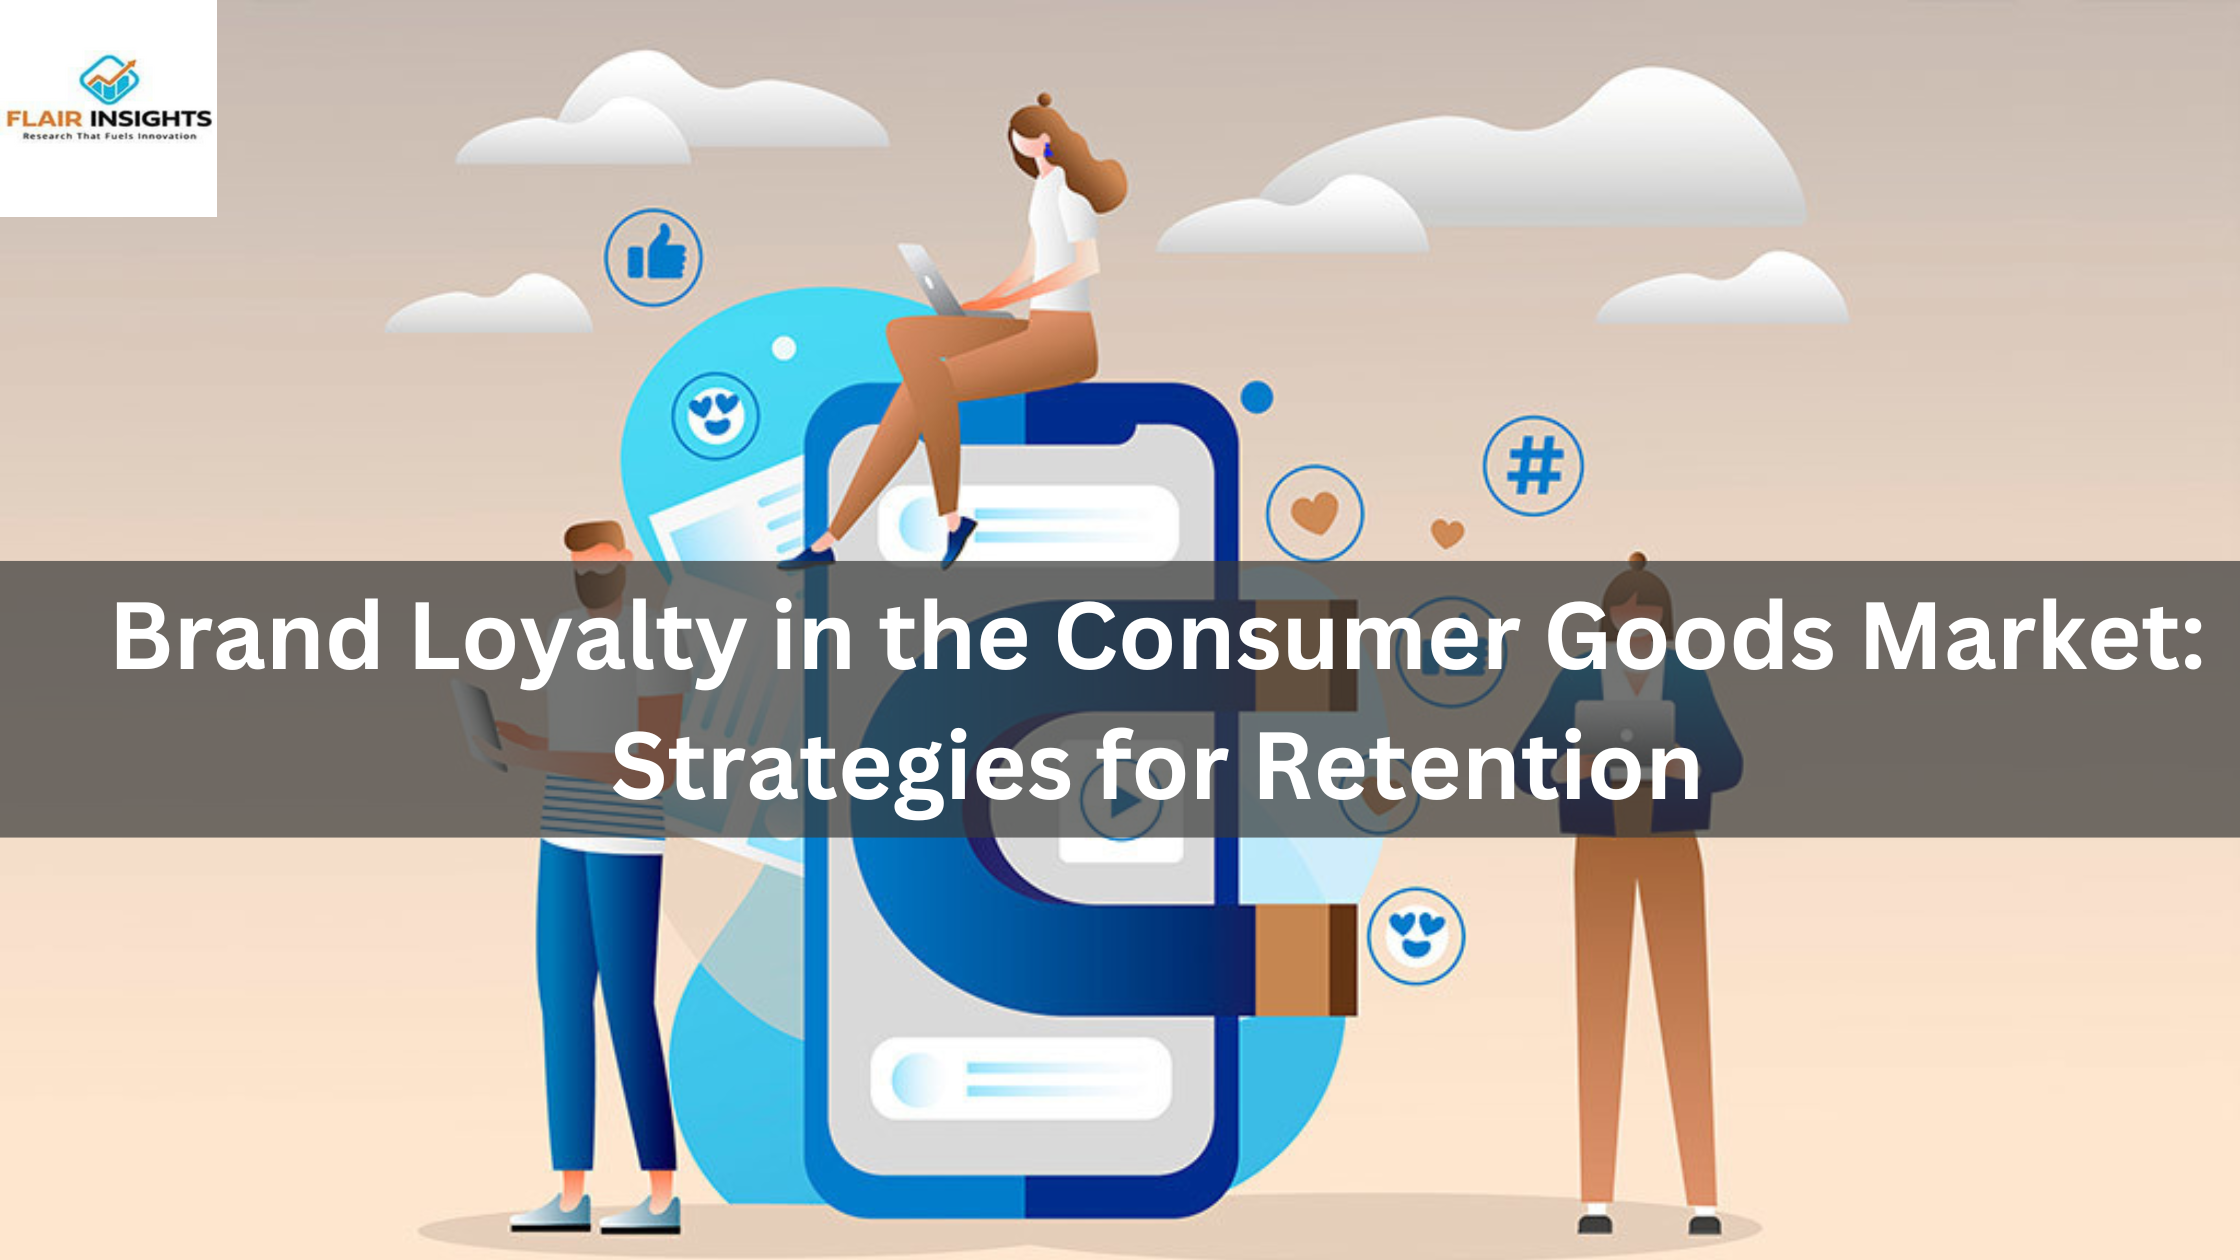 Brand Loyalty in the Consumer Goods Market: Strategies for Retention